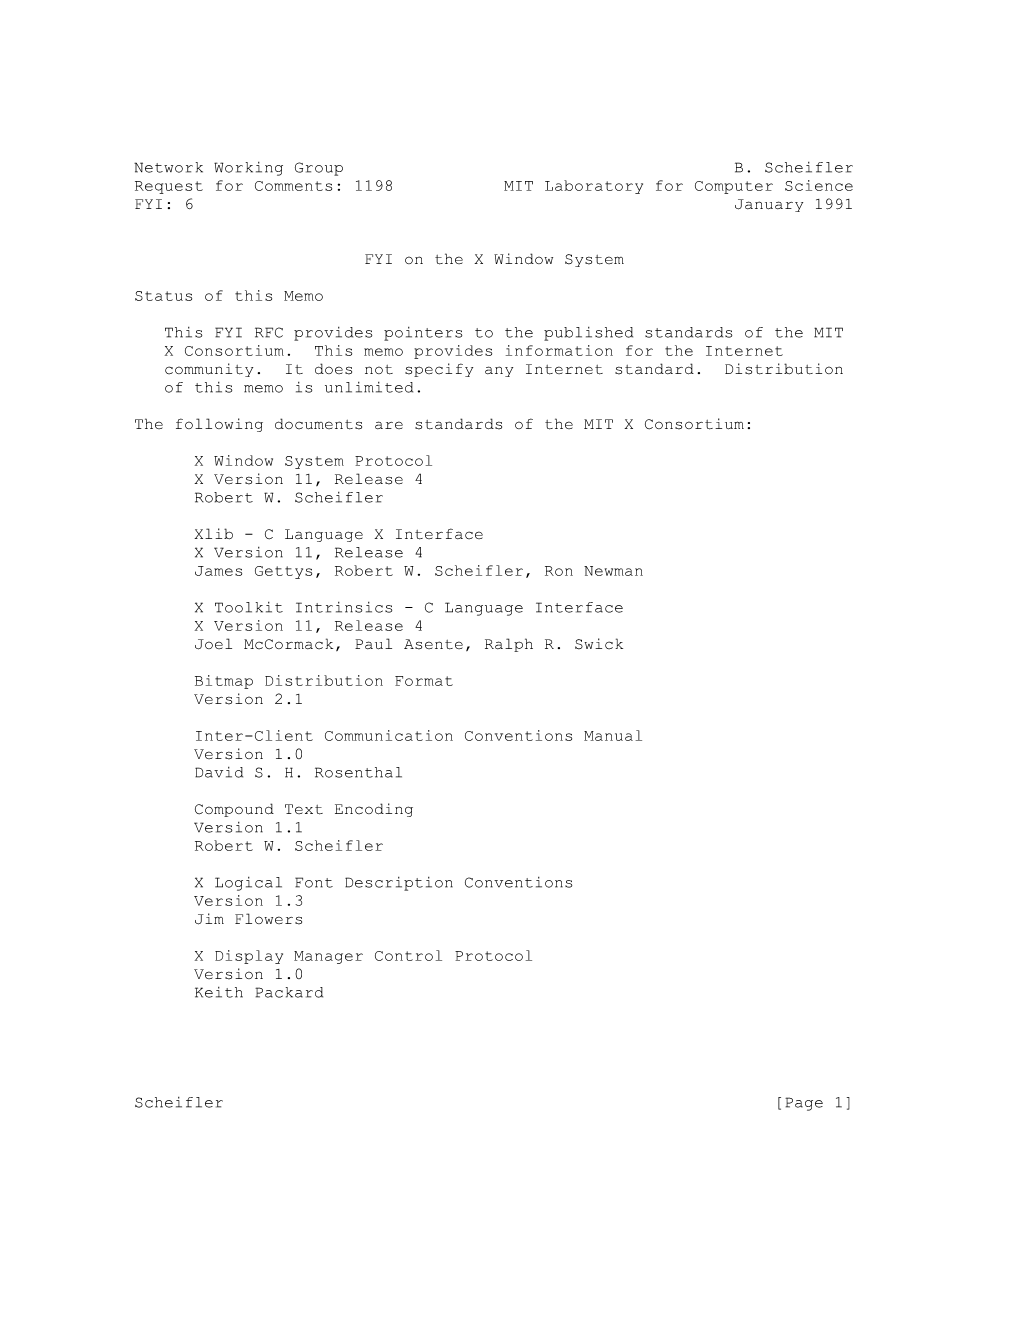 Network Working Group B. Scheifler Request for Comments: 1198 MIT Laboratory for Computer Science FYI: 6 January 1991